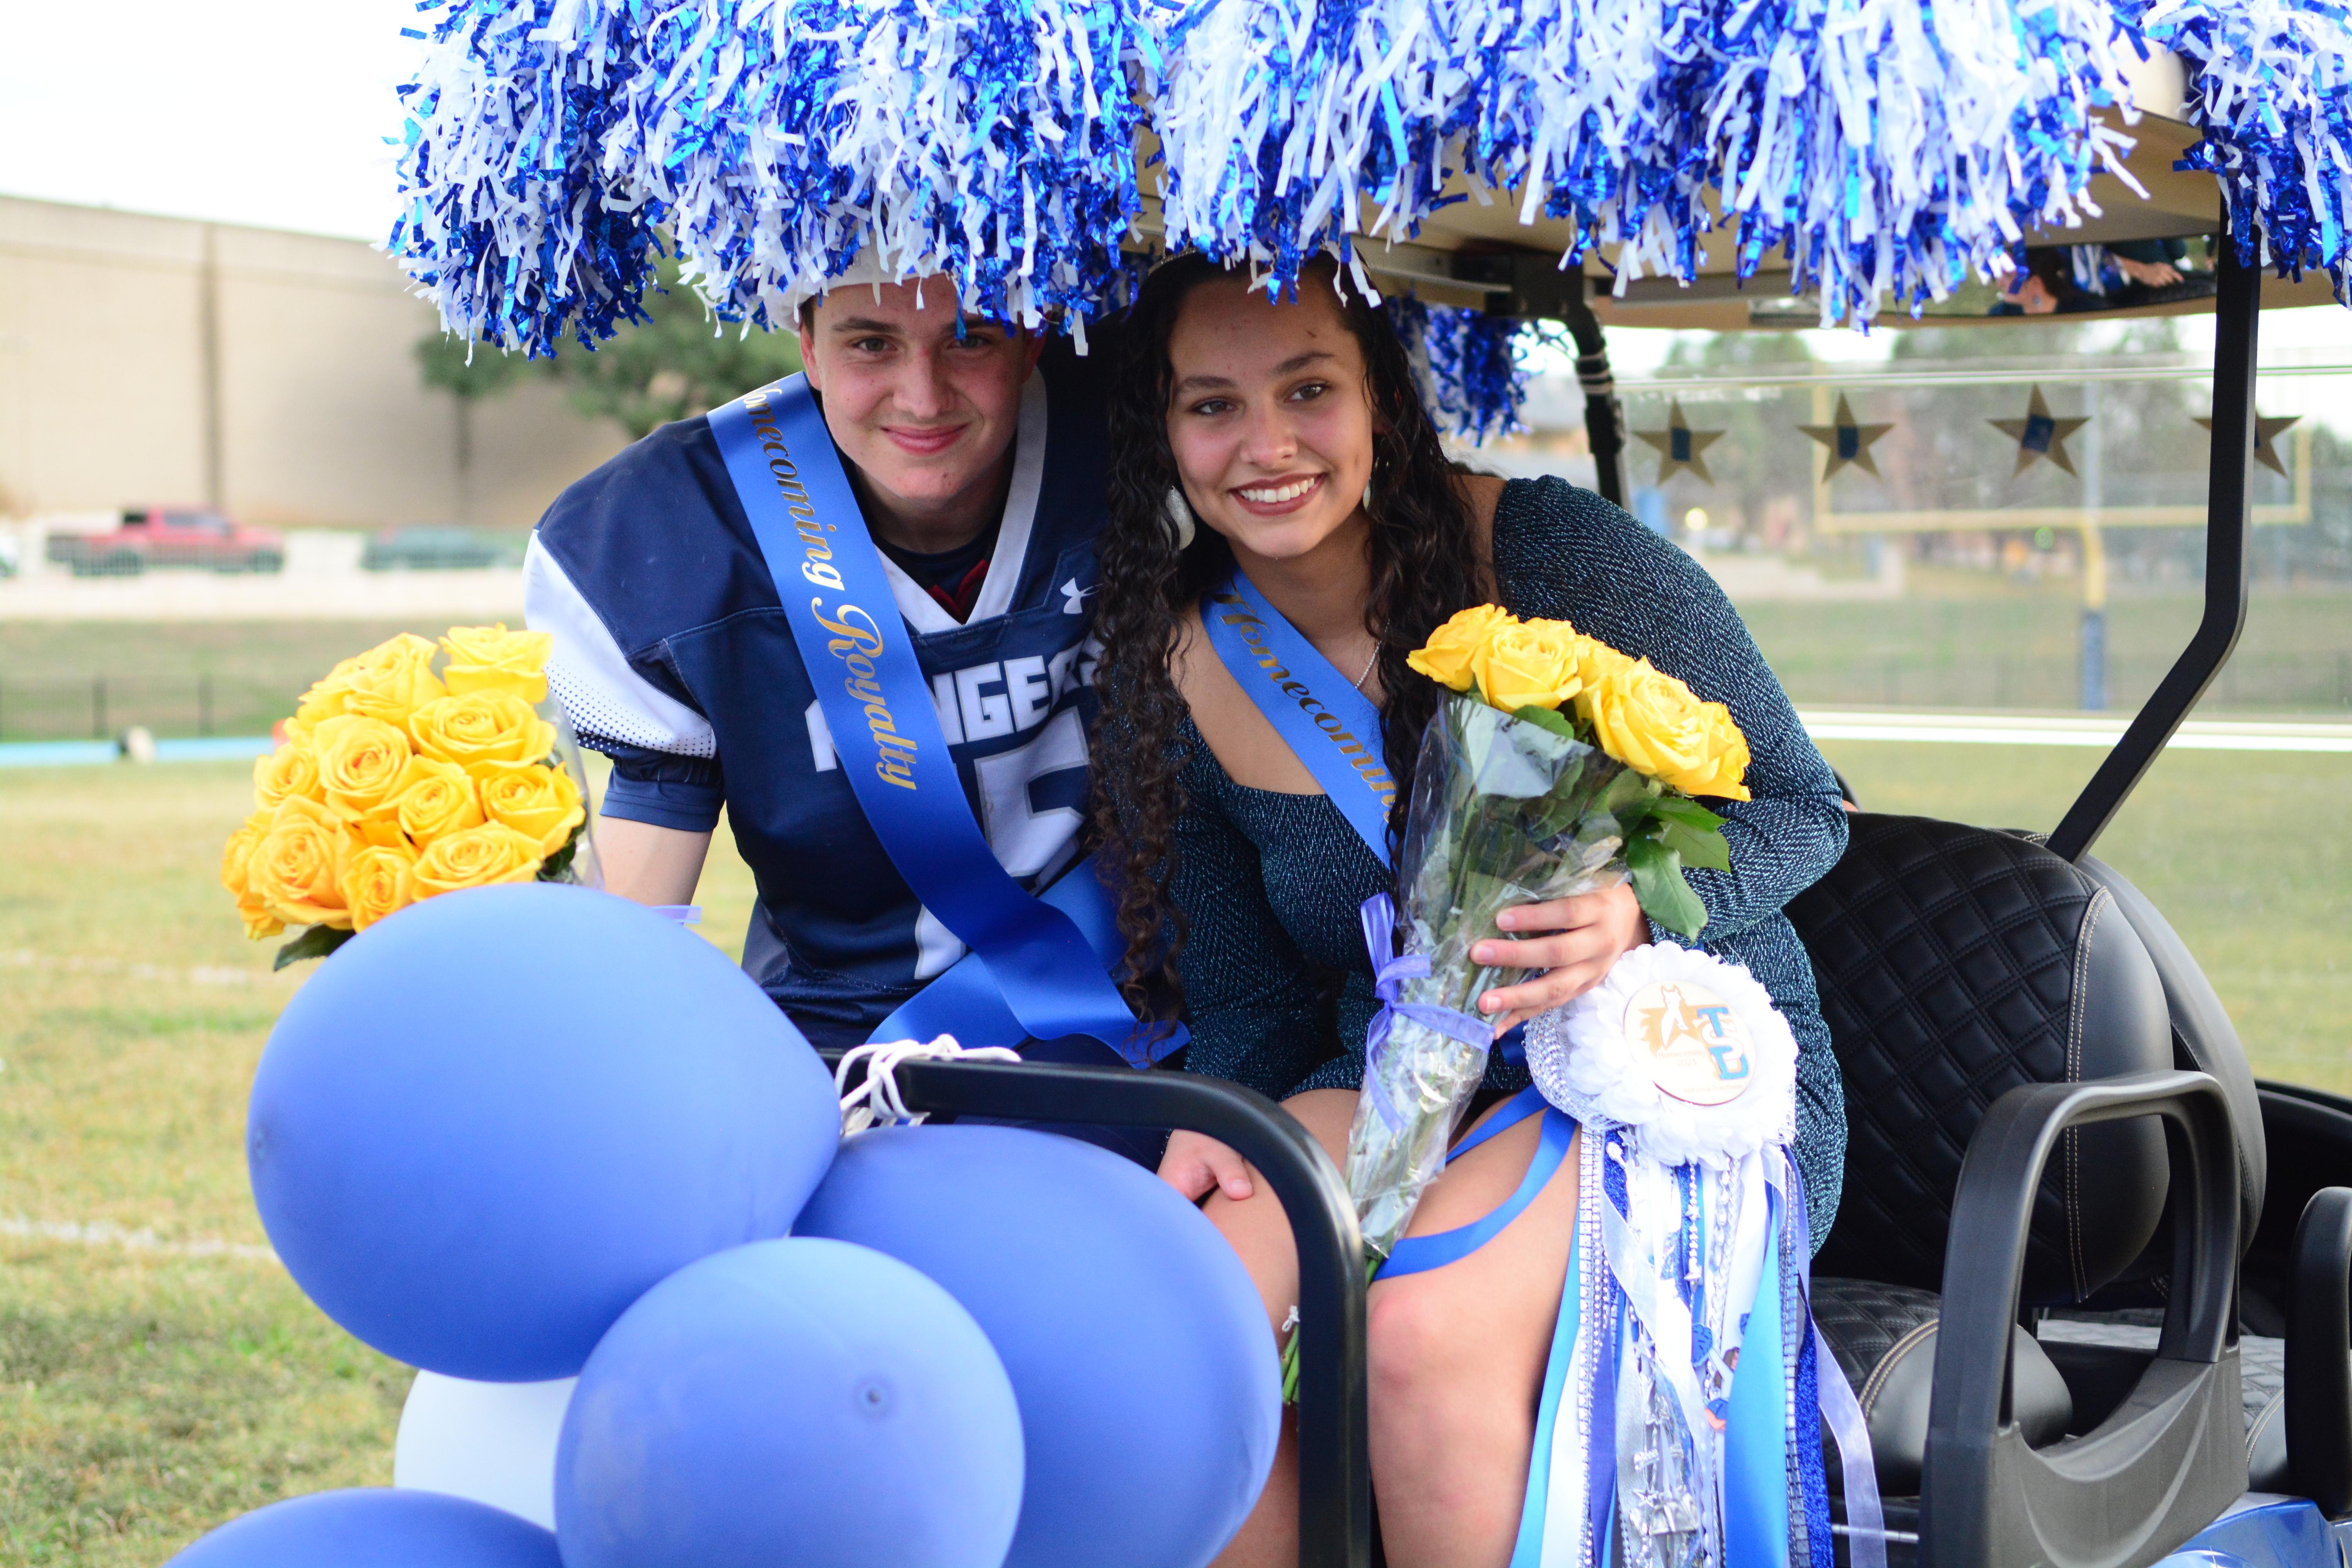 Two Homecoming Royalty, Xavier and McKenna, posed sitting in the back of the golf cart decorated with blue and white streamers and balloons. Both of them have stash’s text: Homecoming Royalty. They held their bouquet of yellow flowers and they smiled.